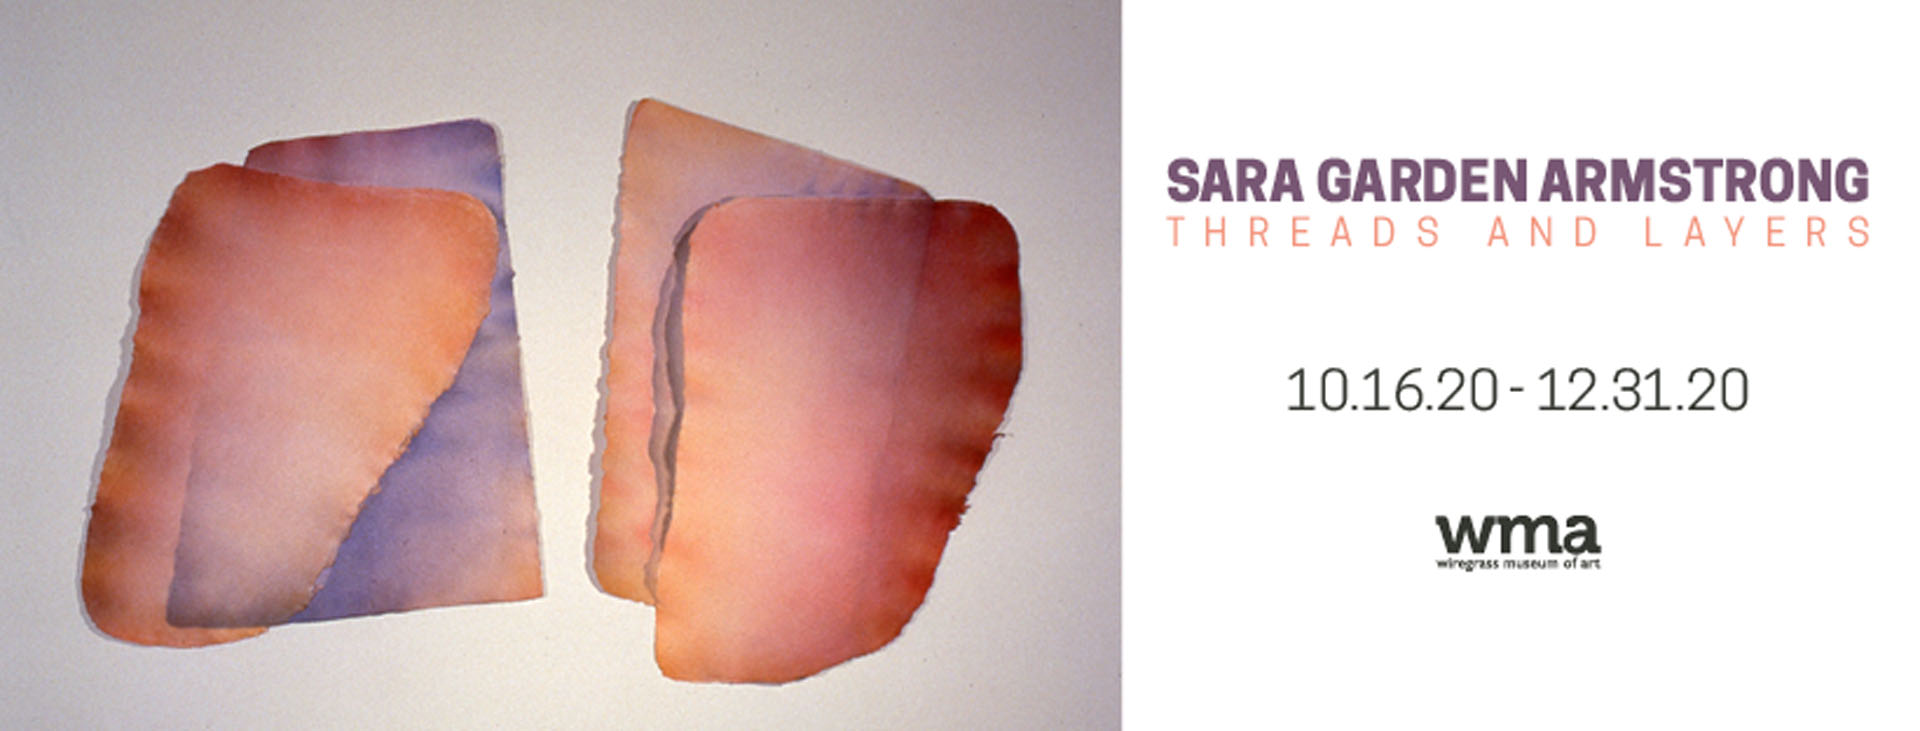 ‘Sara Garden Armstrong- Threads and Layers’ set to open October 16 at WMA